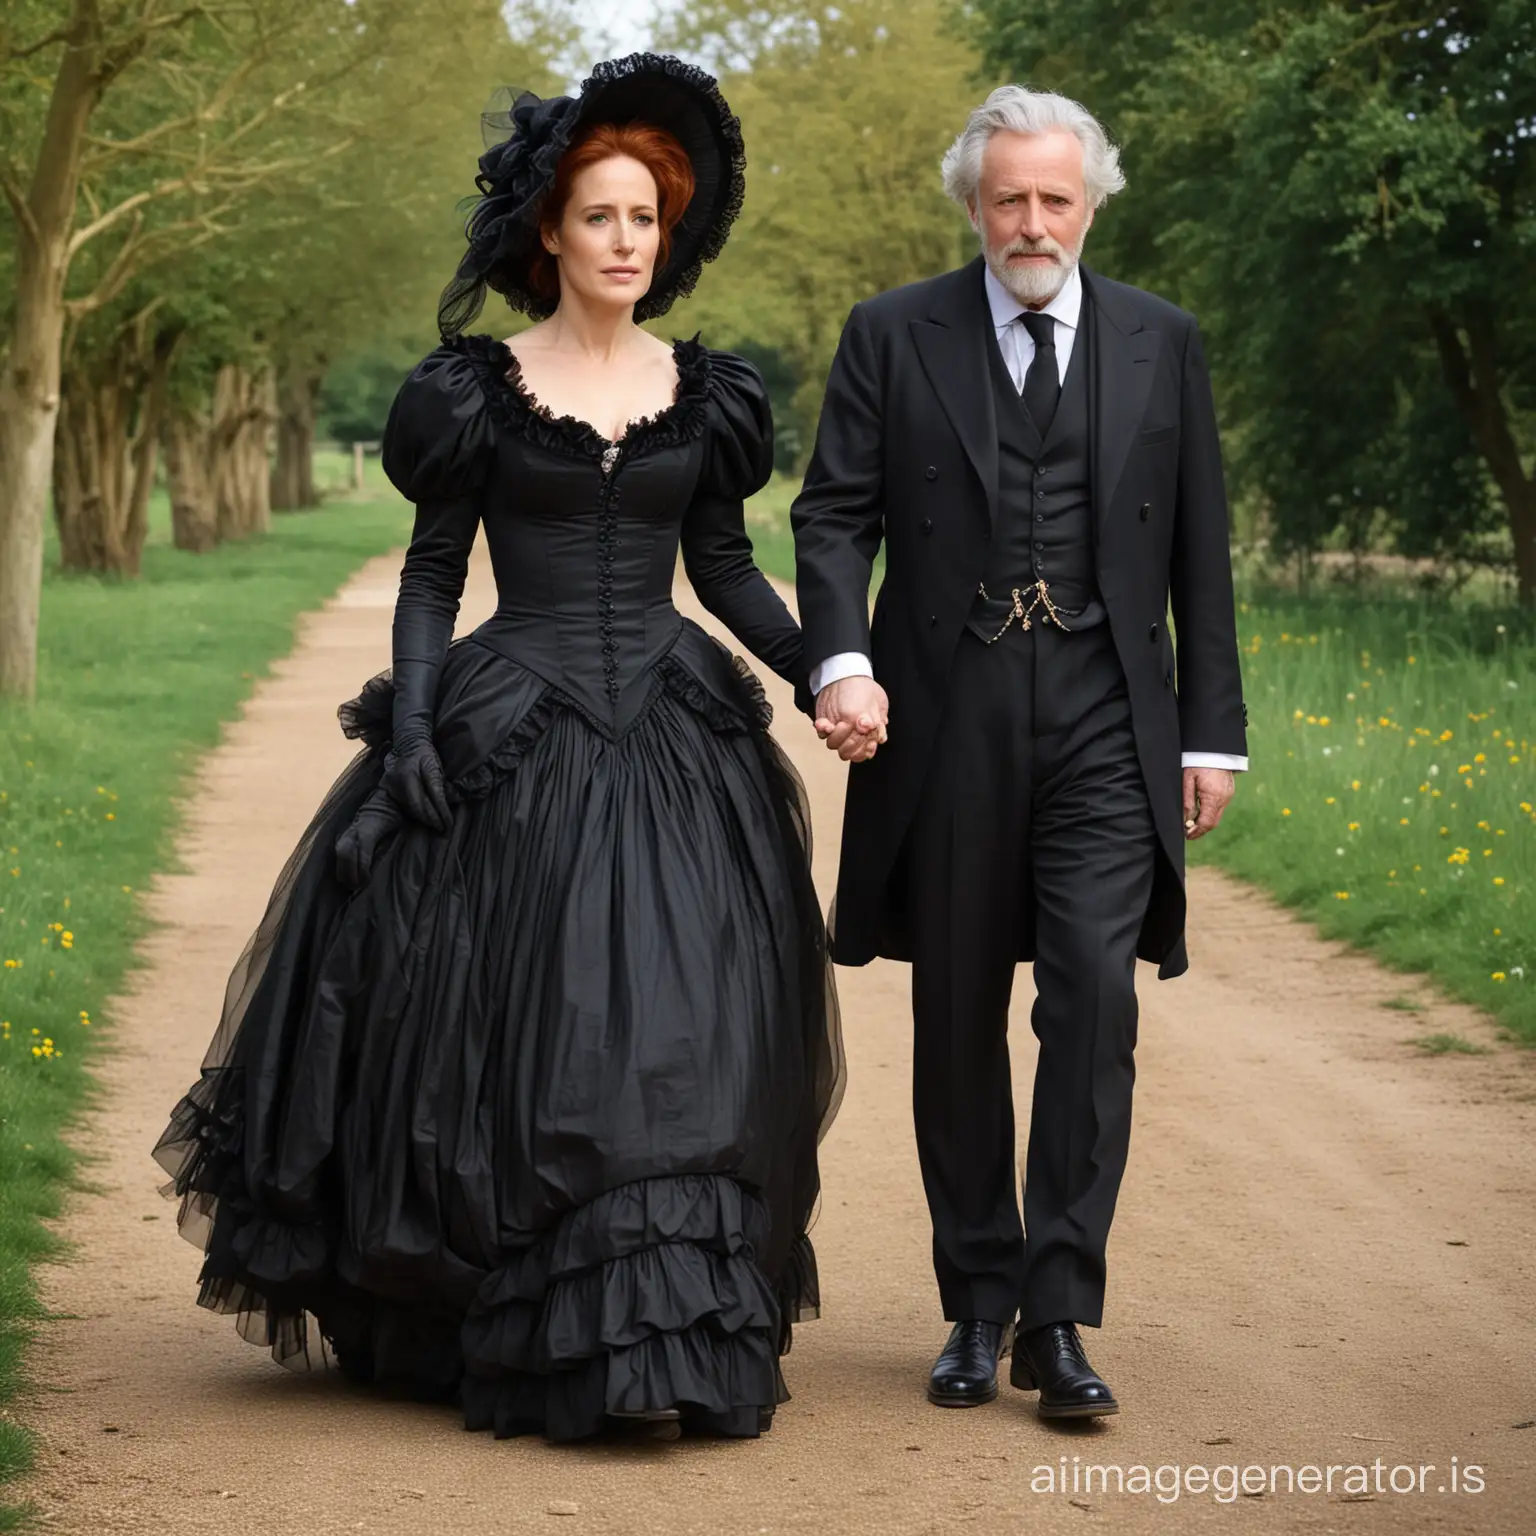 red hair Gillian Anderson wearing a black floor-length loose billowing 1860 Victorian crinoline poofy dress with a frilly bonnet walking hand in hand an old man dressed into a black Victorian suit who seems to be her newlywed husband